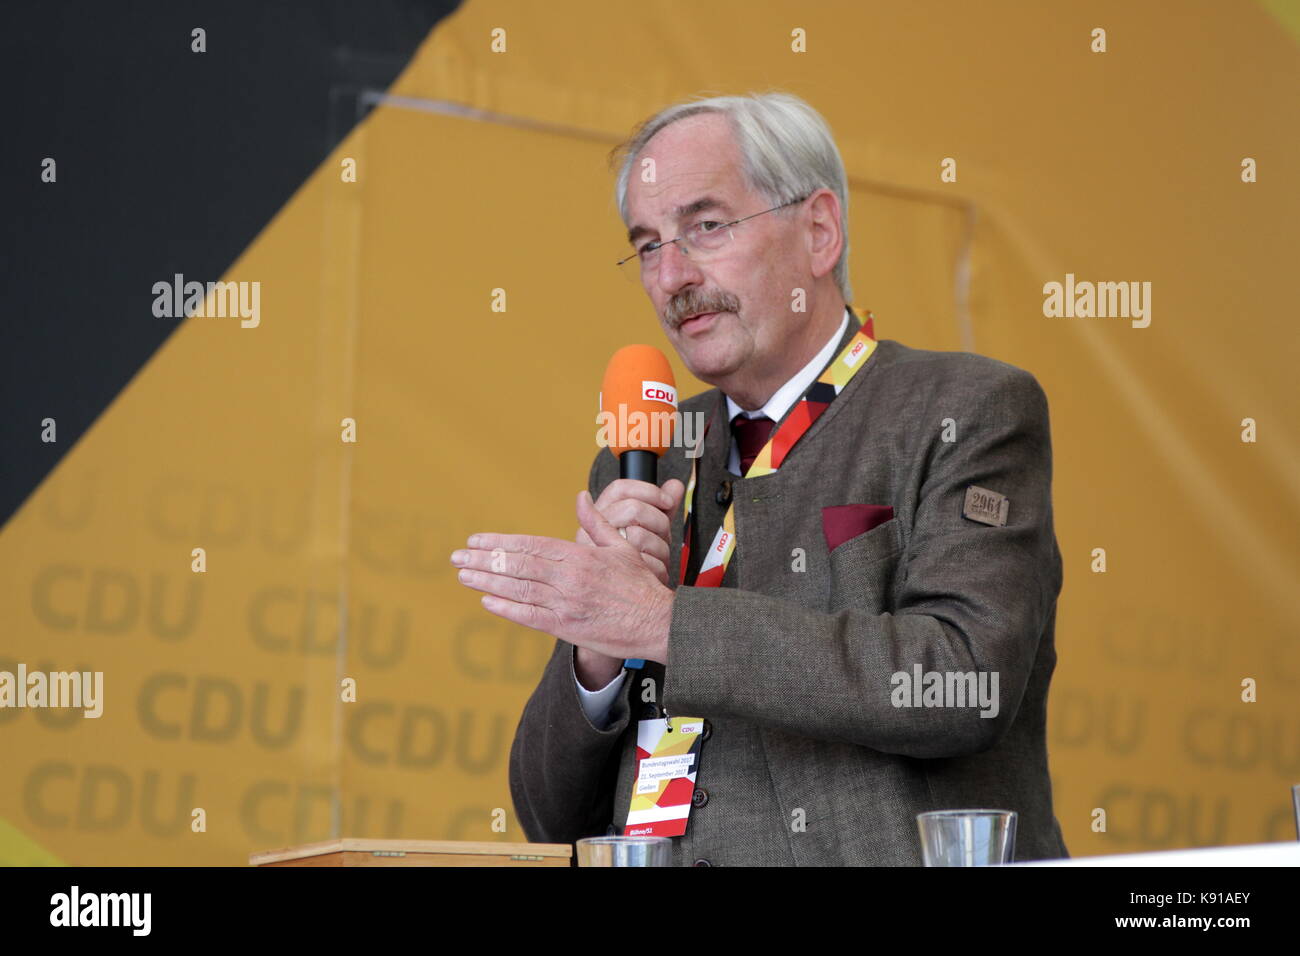 Giessen, Germany. 21st September, 2017. Hans-Jürgen Irmer, CDU direct candidate of constituency 172/Lahn-Dill 2 to the federal Bundestag elections in Germany (24th Sept 2017), is guest speaker at election campaign speech of Angela Merkel, Chancellor of Germany, leader of the Christian Democratic Union and leading candidate as federal chancellor  to the federal Bundestag elections, here at Brandplatz in Giessen, Germany. Credit: Christian Lademann Stock Photo